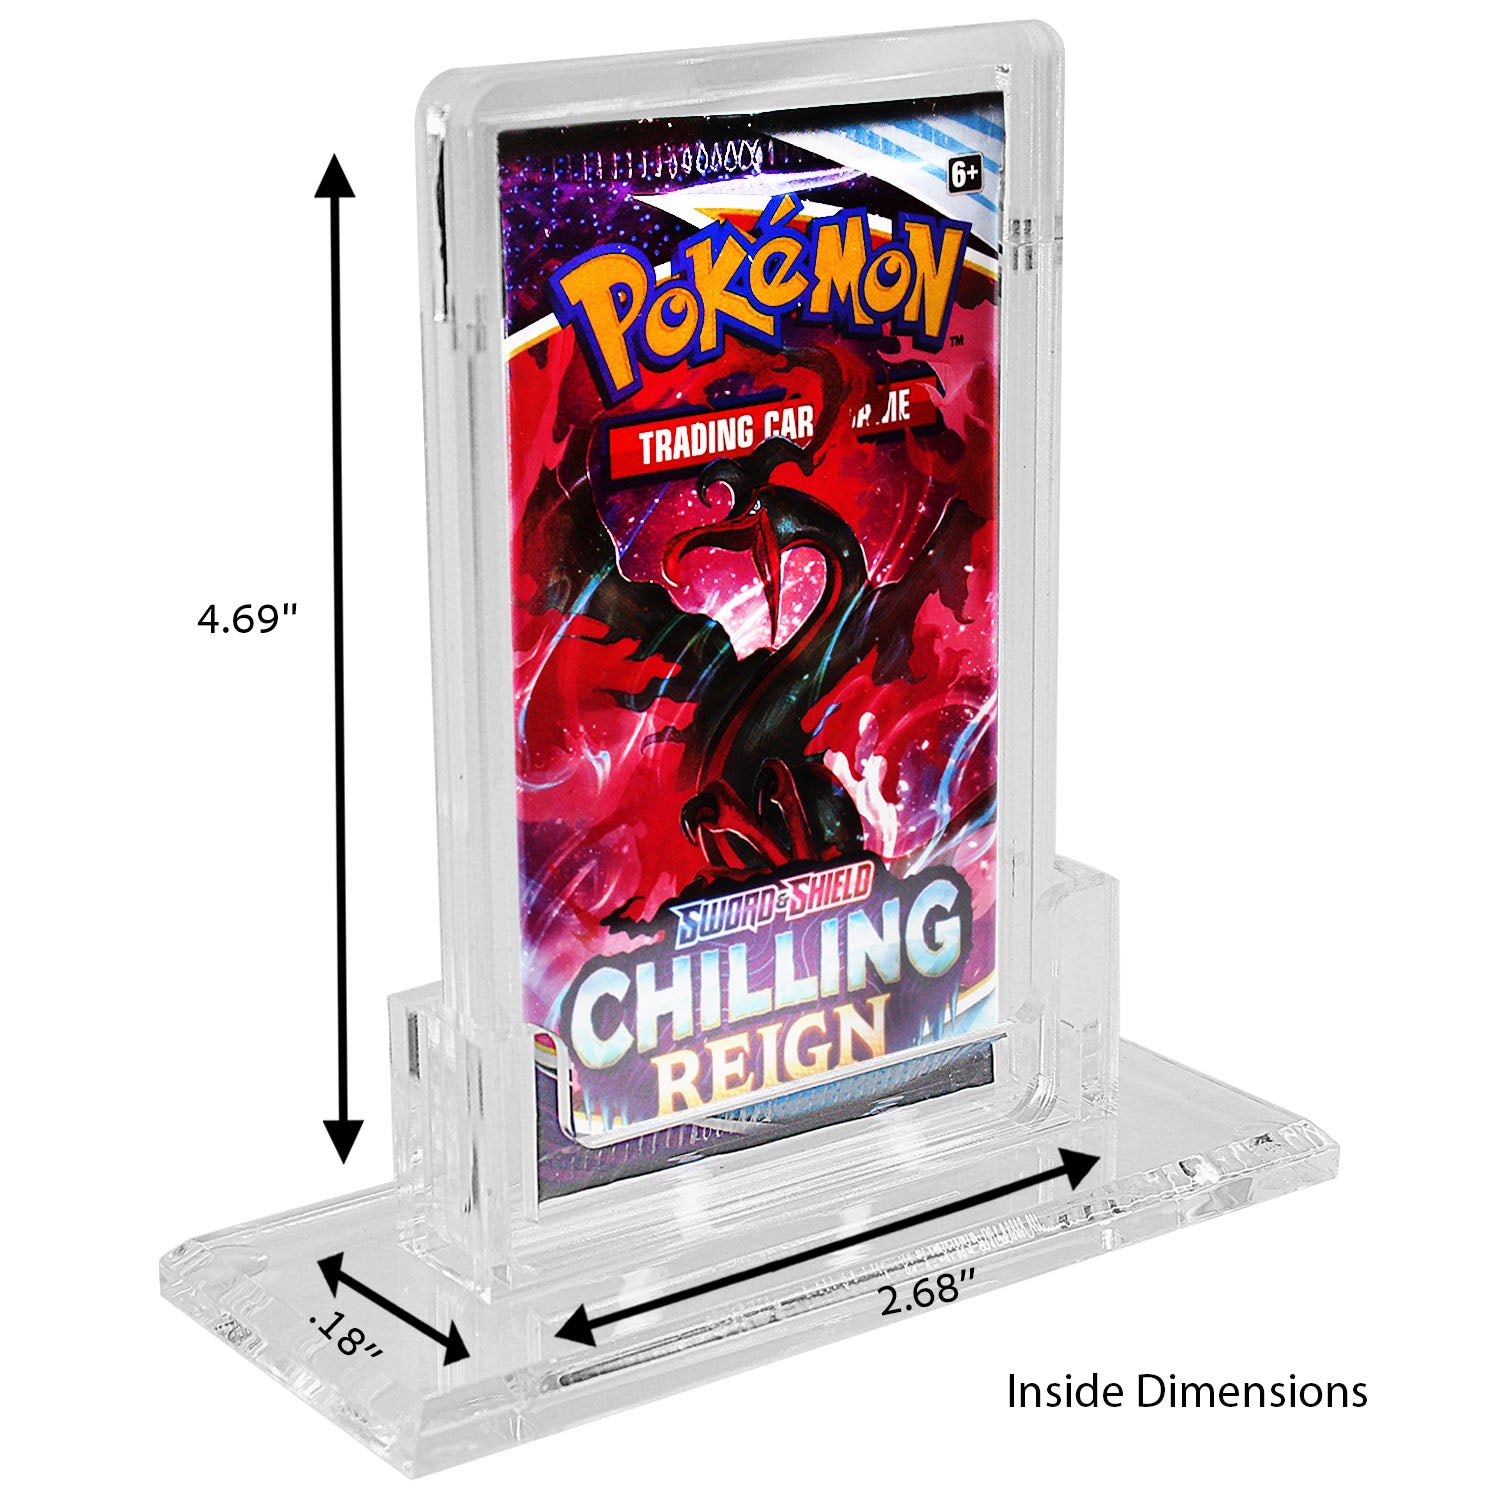 Acrylic Stand for Pokemon Booster Packs - Wholesale